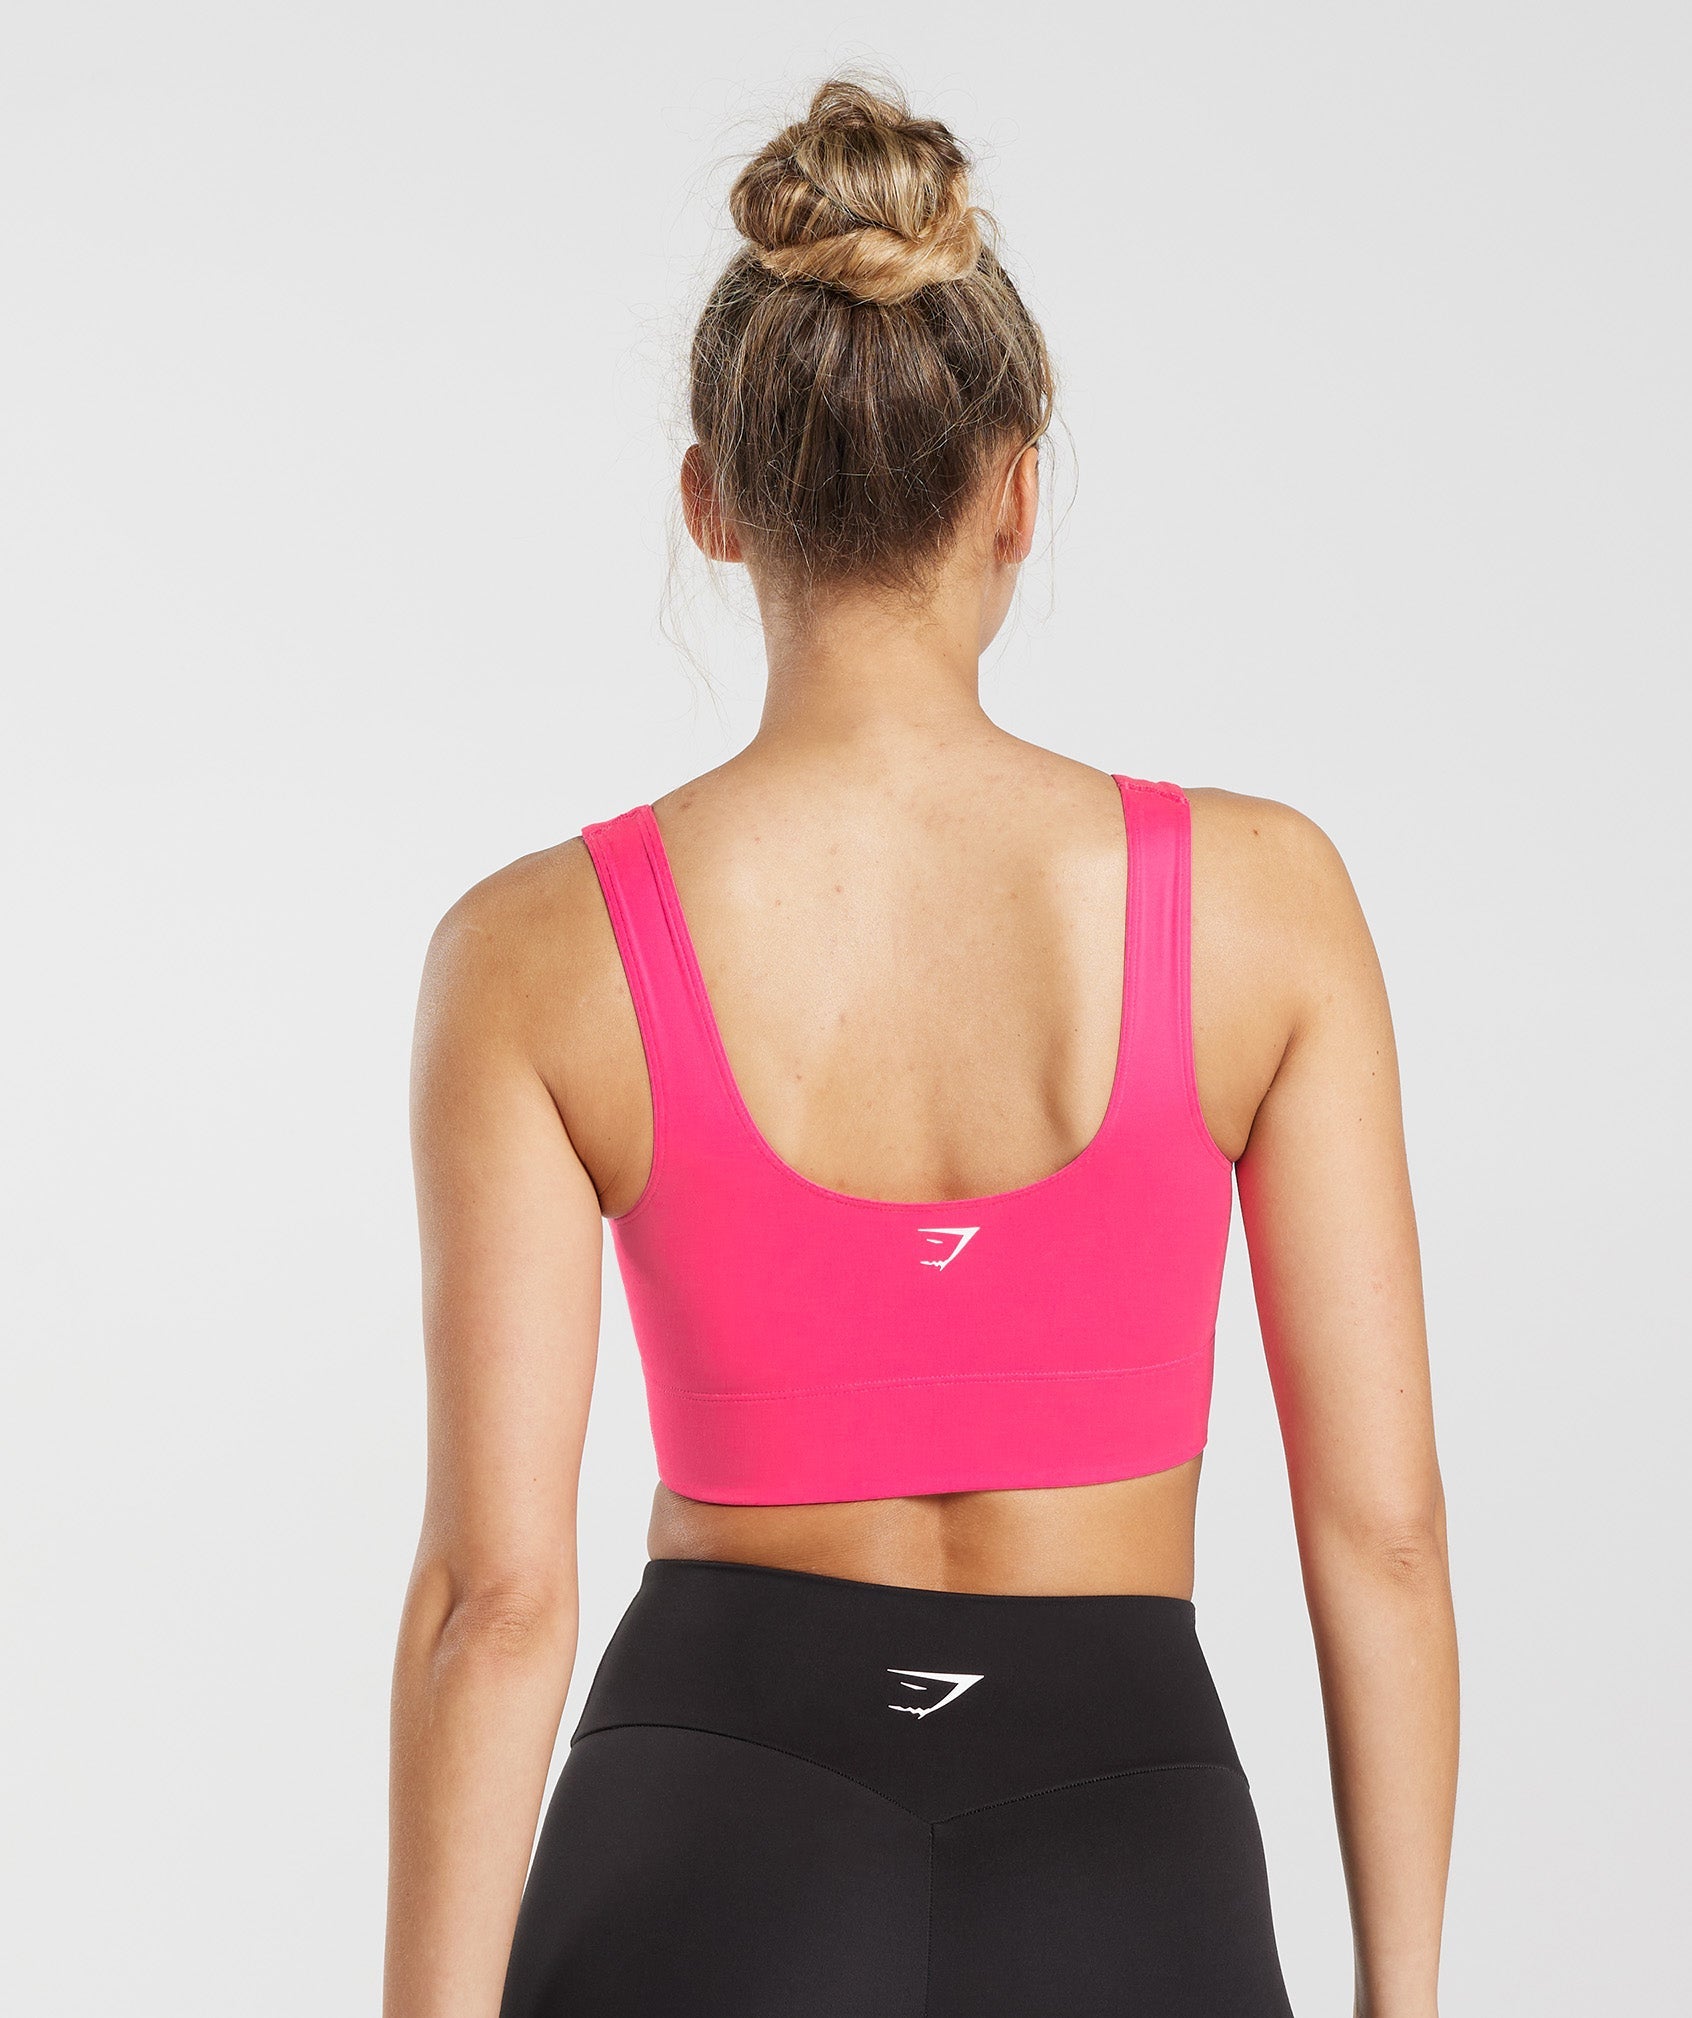 Women 's A–C Cups Y Back Sports Bras Spaghetti Strap Low Impact Racerback  Padded Yoga Running Workout Bra（2204908 Hot Pink/XL